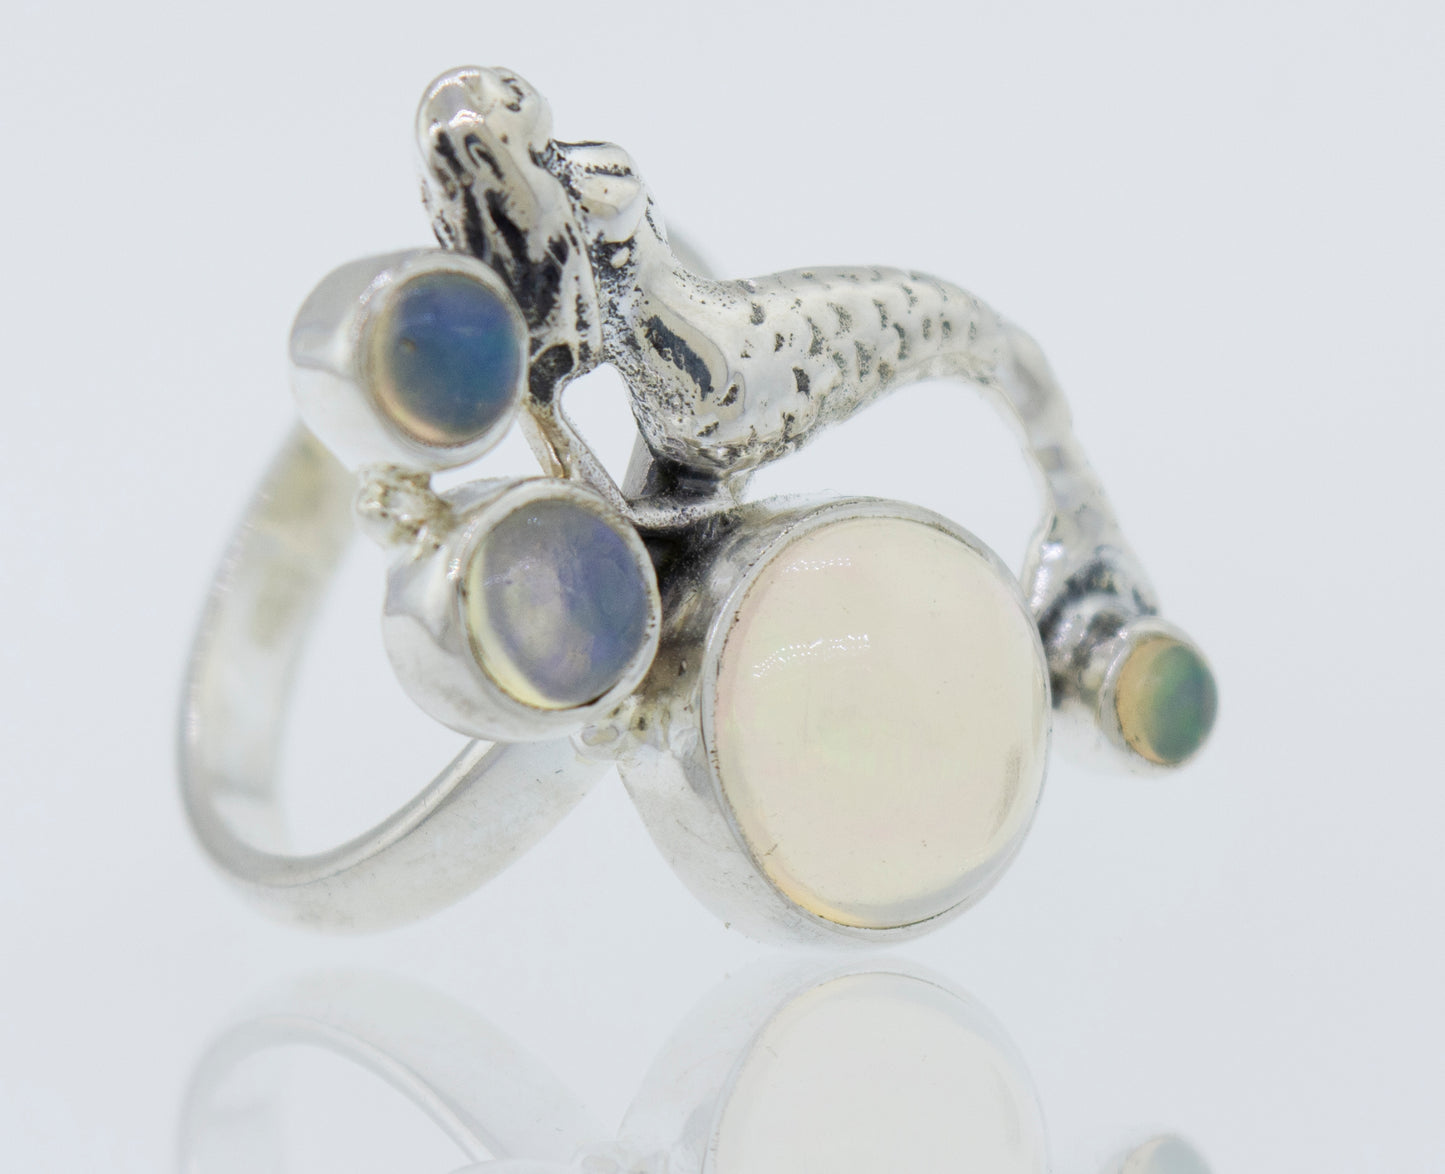 A mythical Mermaid Ring with Ethiopian Opal adorned with a mesmerizing mermaid and captivating Ethiopian opals.